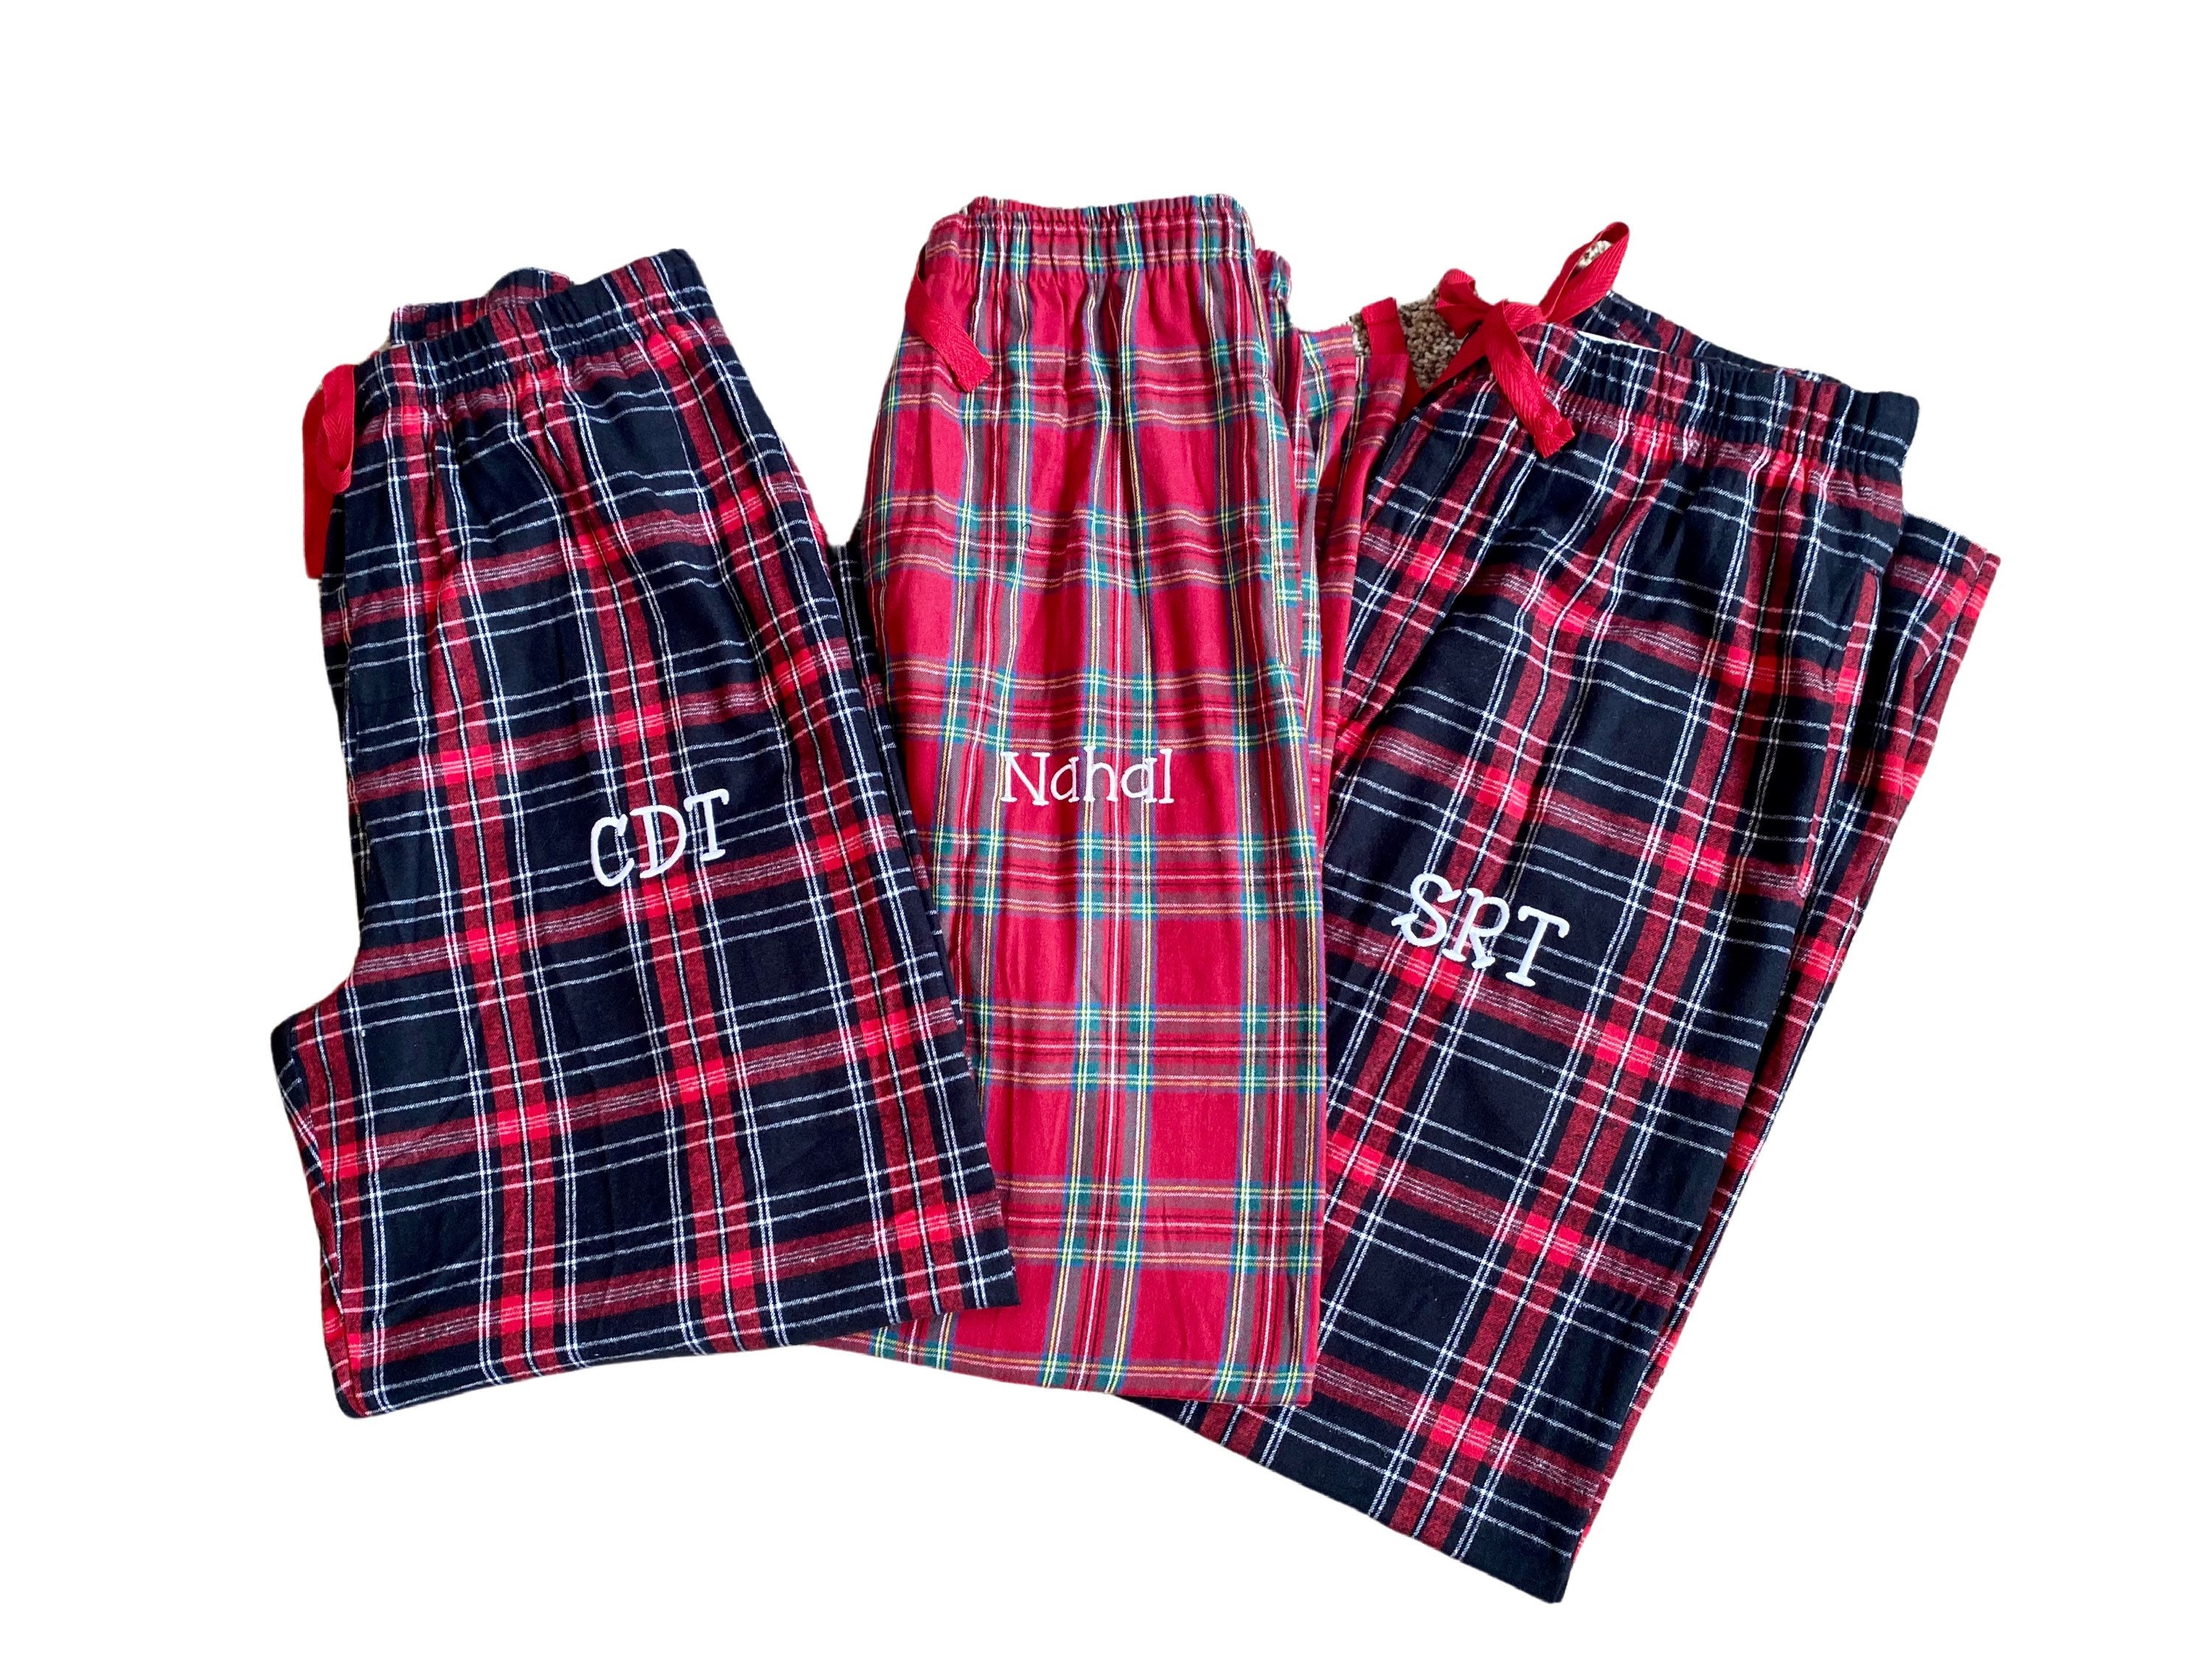 Monogrammed Red with Black Swiss Dot Pajama Pants